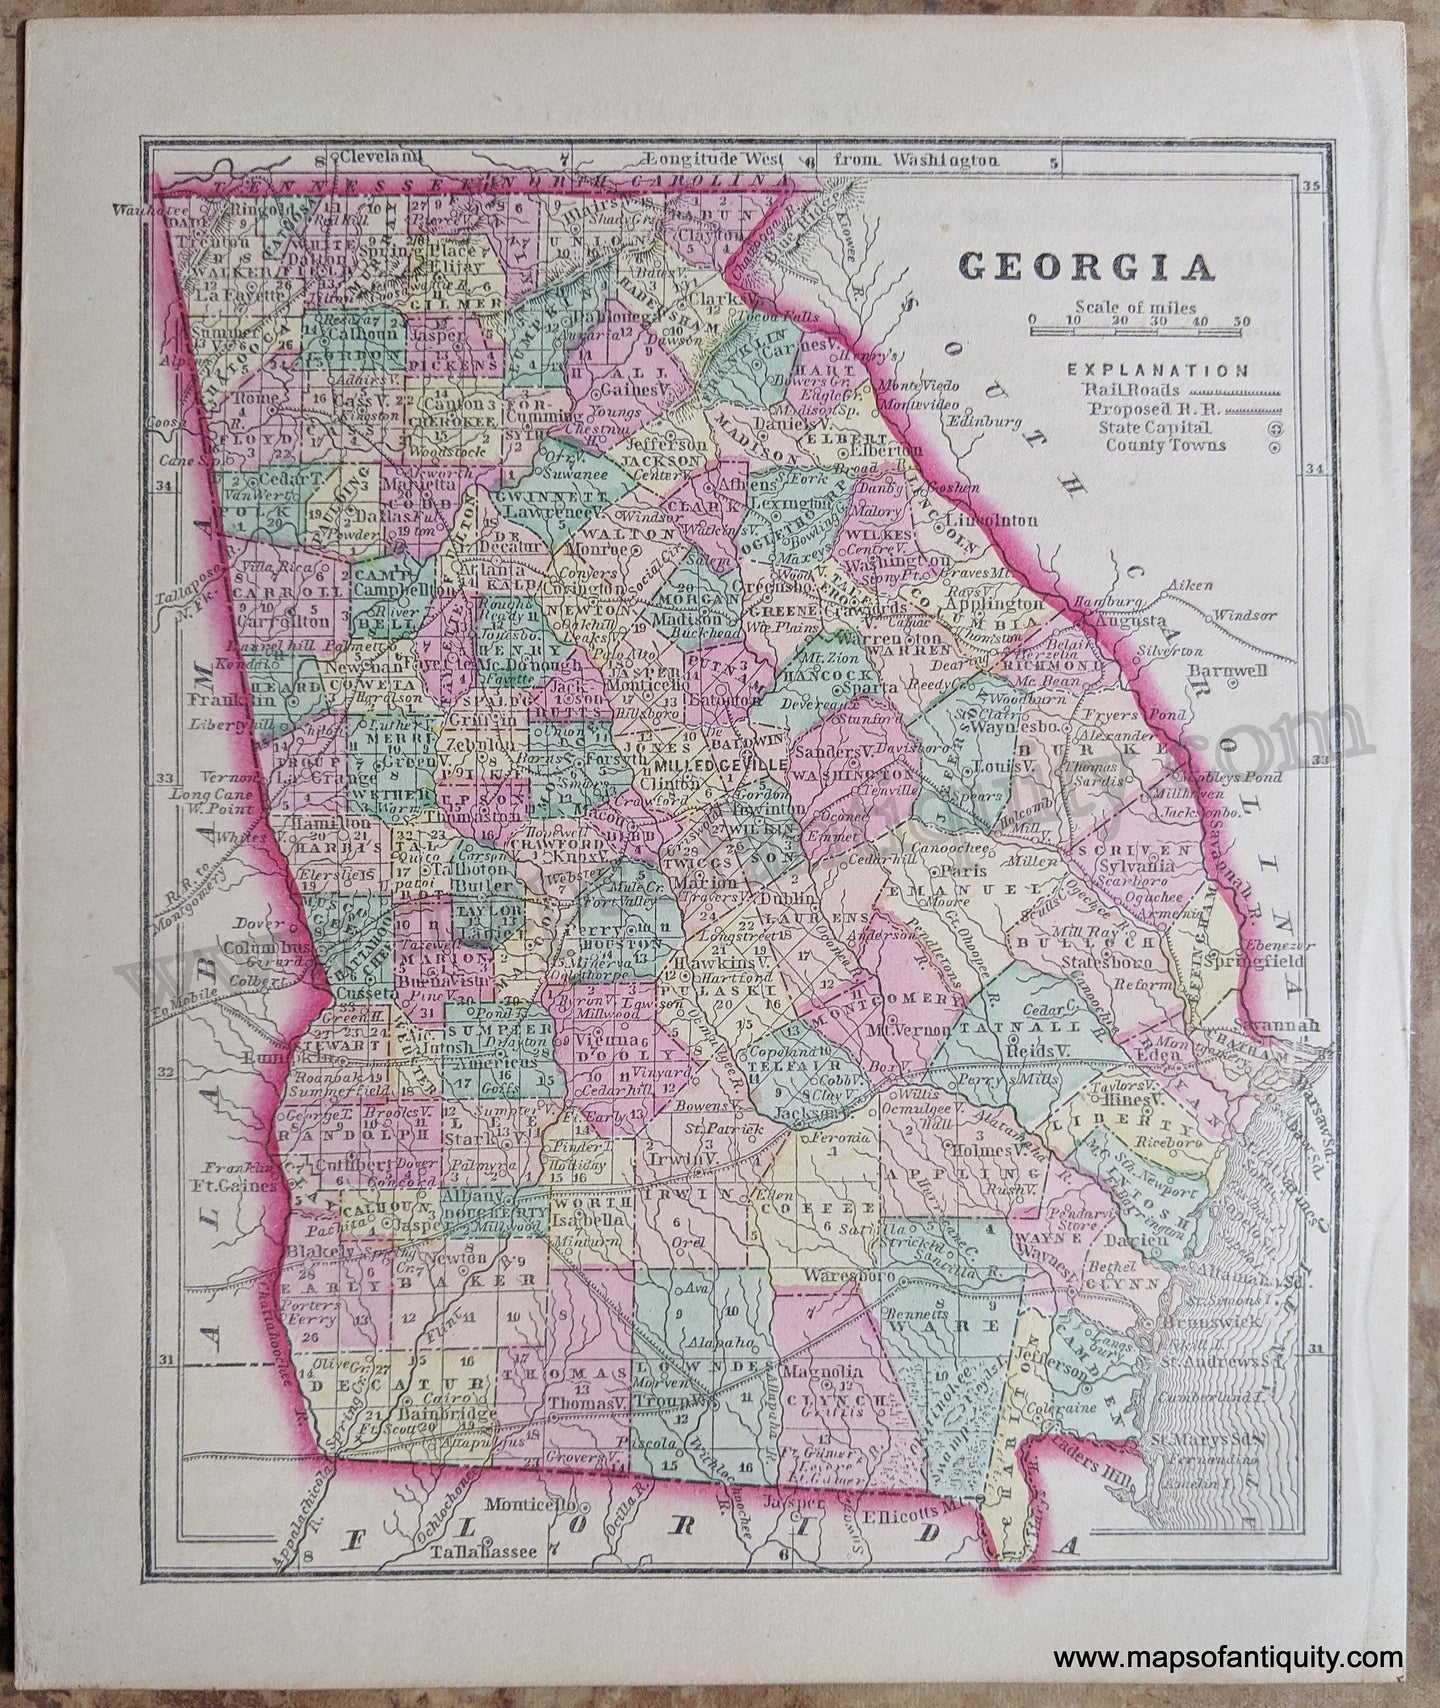 Antique-Hand-Colored-Map-Georgia-United-States-South-1857-Morse-and-Gaston-Maps-Of-Antiquity-1800s-19th-century